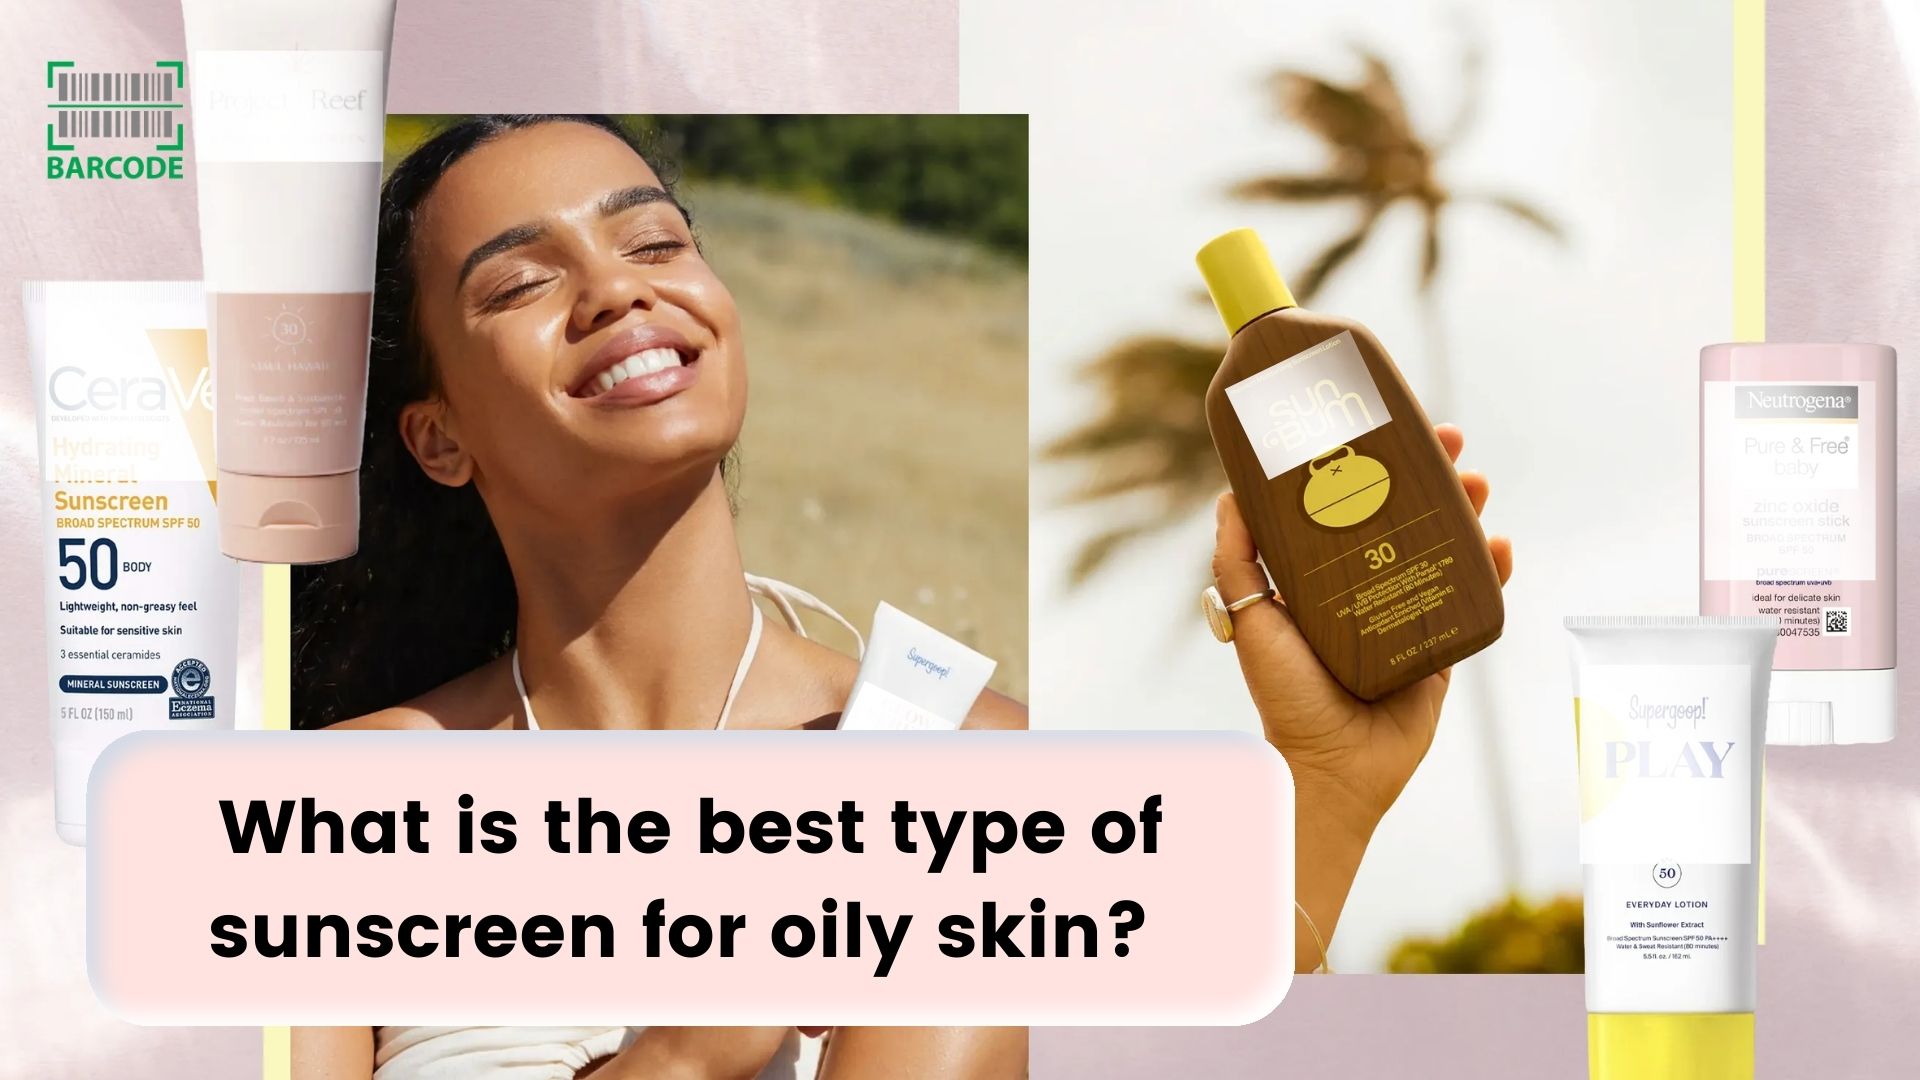 What type of sunscreen for oily skin should you choose?